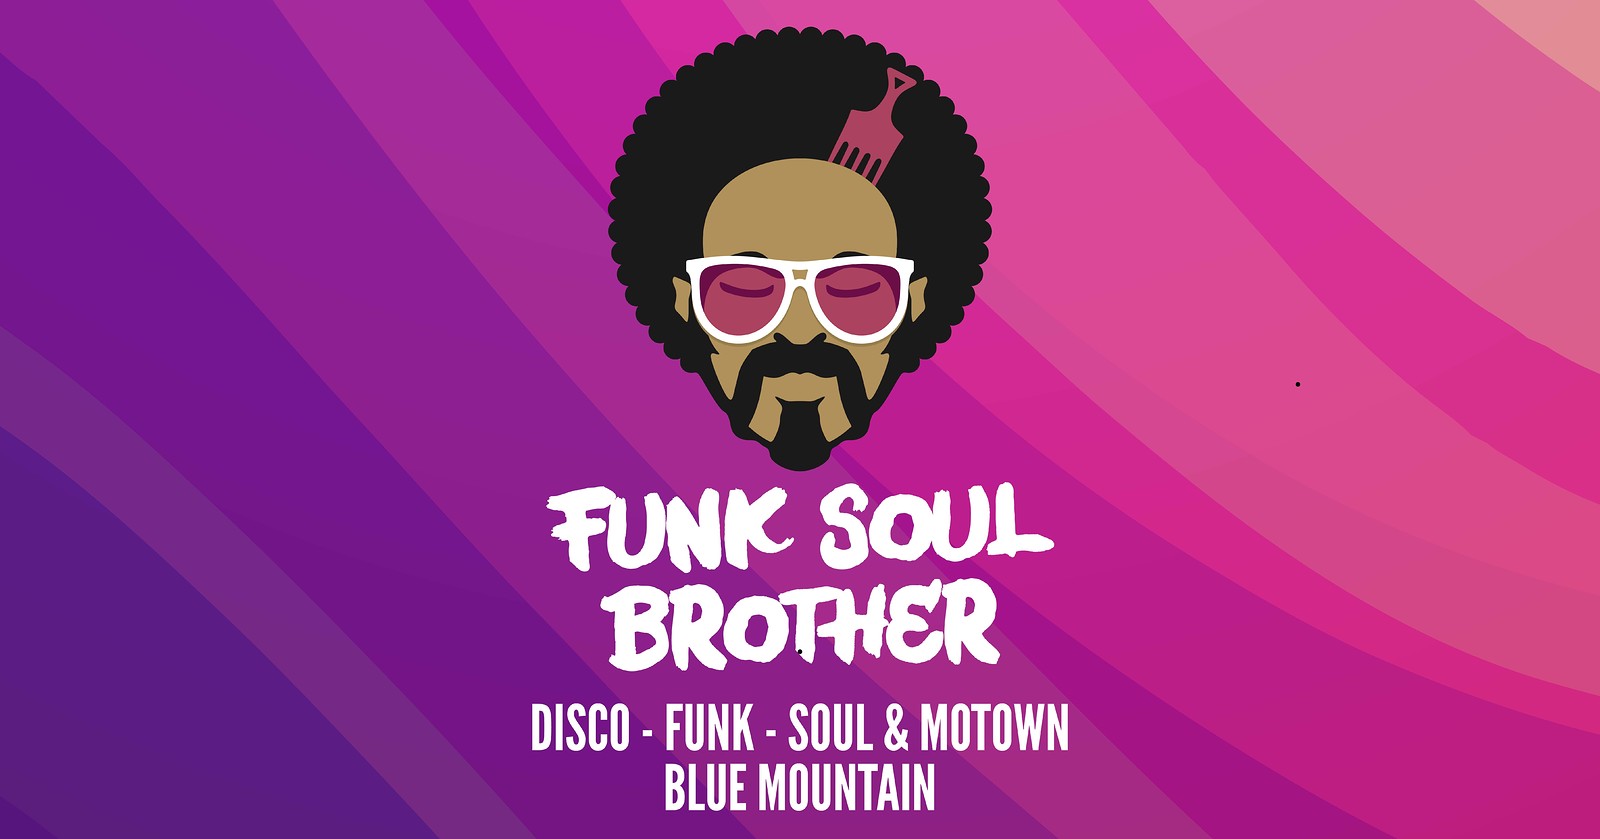 Funky souls. Соул фанк. Funk Soul brother. Funk / Soul / Disco. Funk show brother.